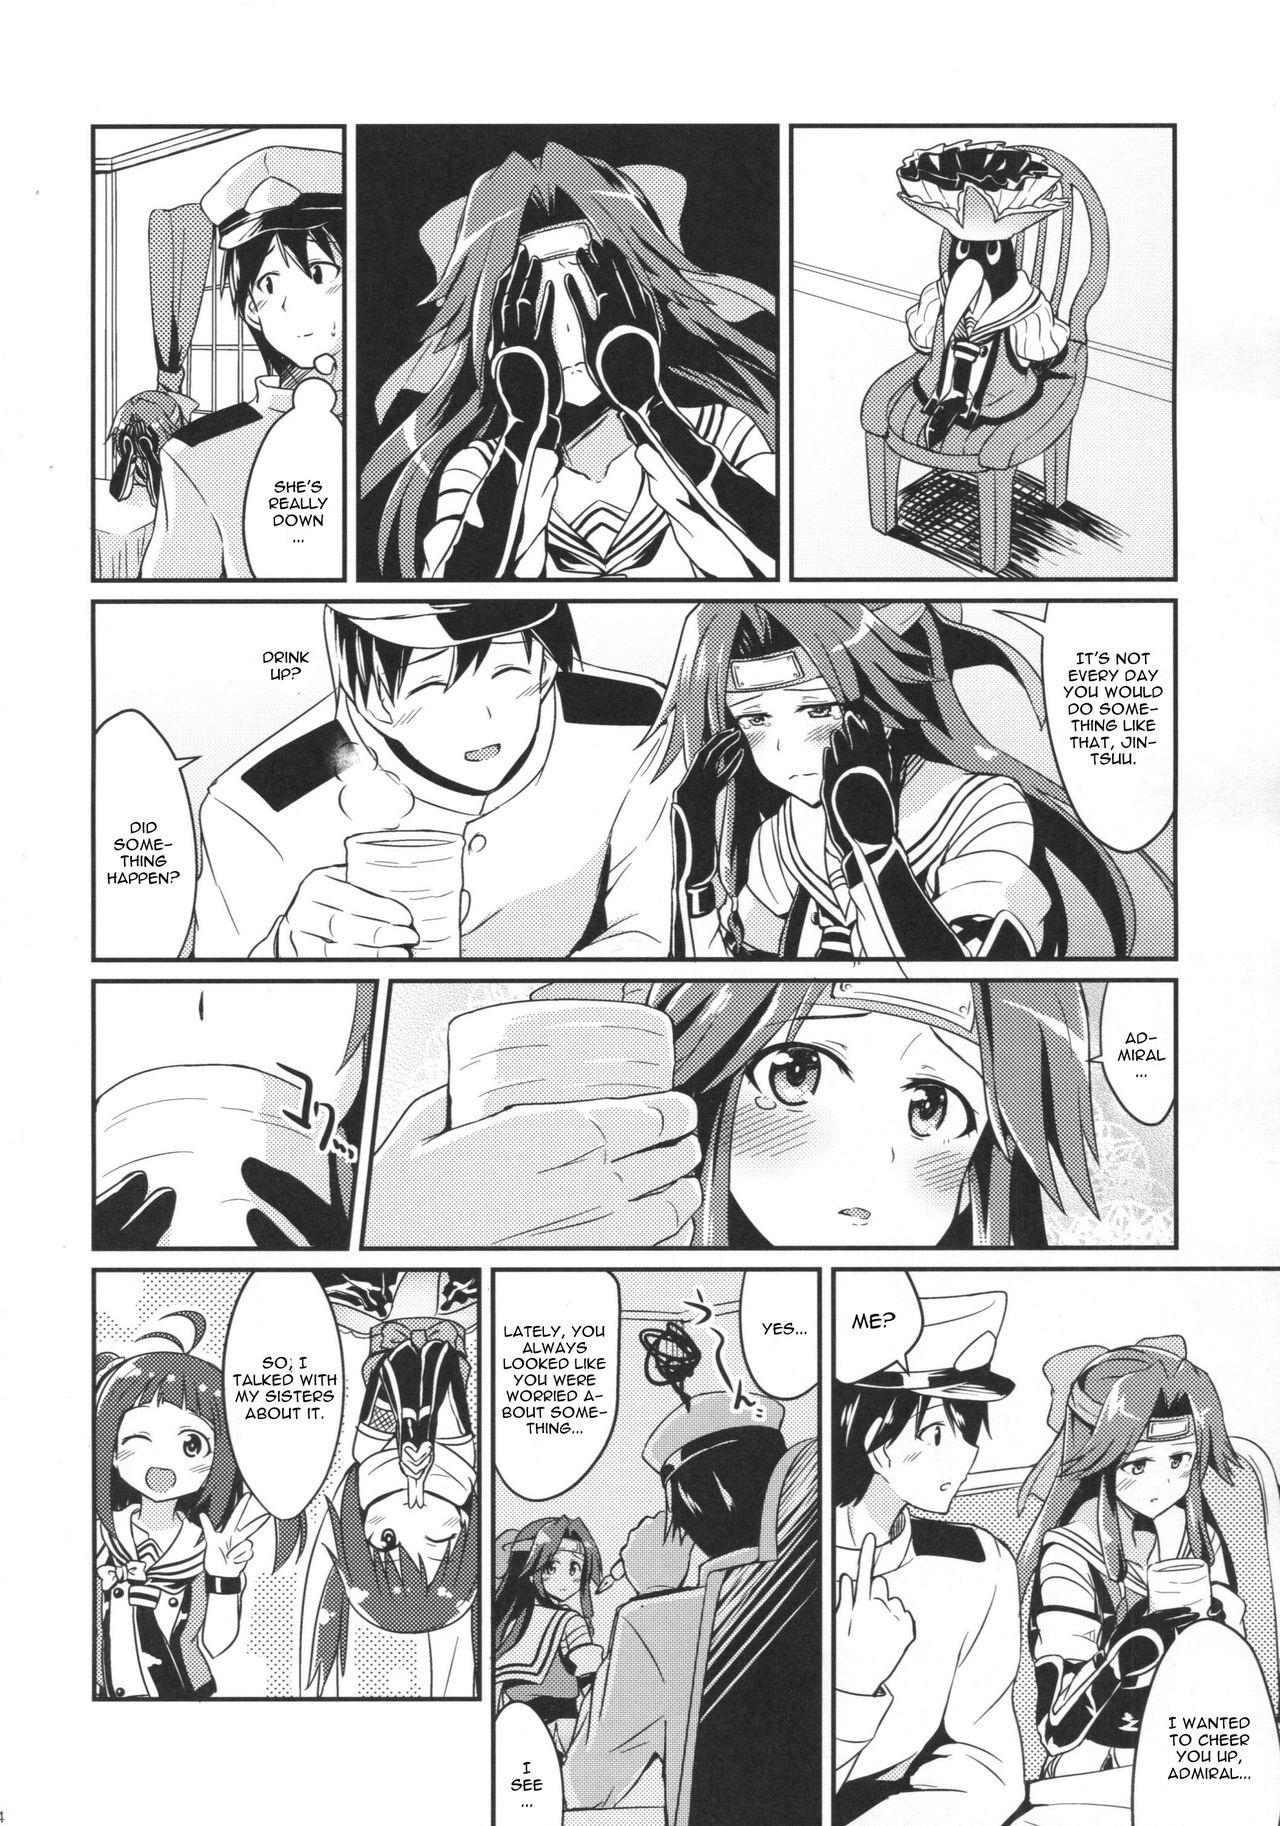 Chacal Jintsuu no Omoi - Kantai collection Pussylicking - Page 3